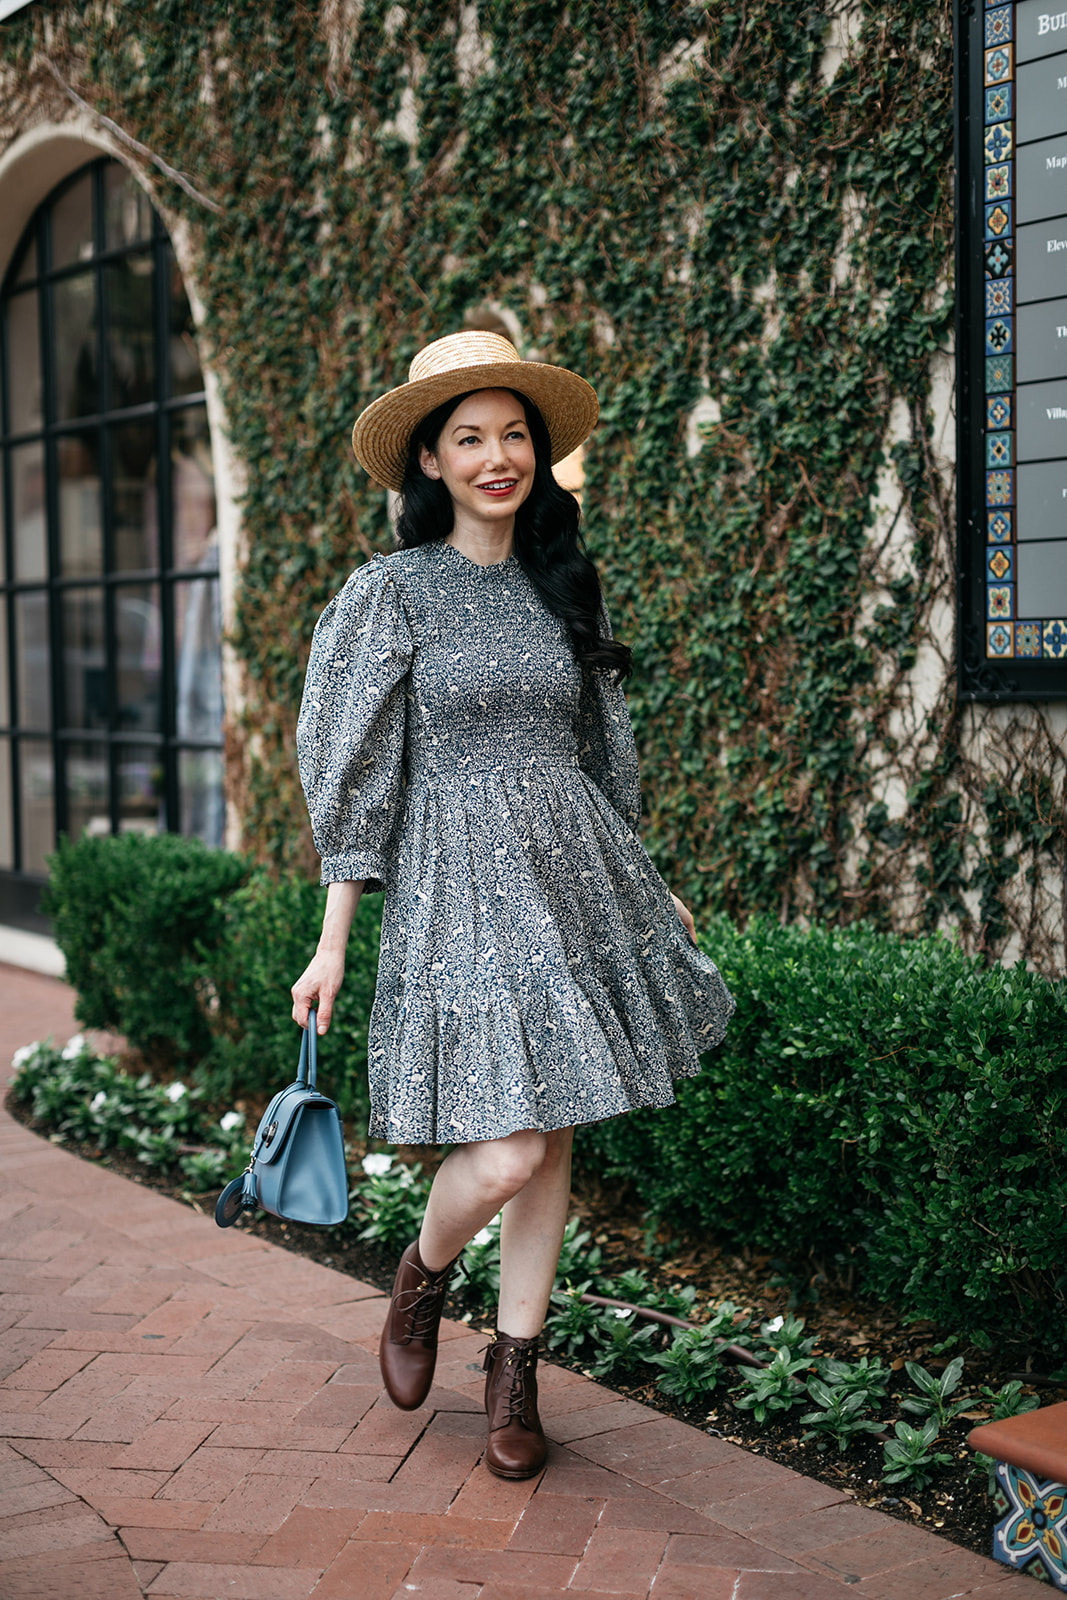 Cottagecore, Romantic Dress, Sezane Ankle Boots |  Romantic Dress by popular Dallas fashion blog, Pretty Little Shoppers: image of a woman walking on a brick pathway next to a building covered in ivy and wearing a Doen Leda fawn dress, Lack of Color straw boater hat, and Suzanne booties.